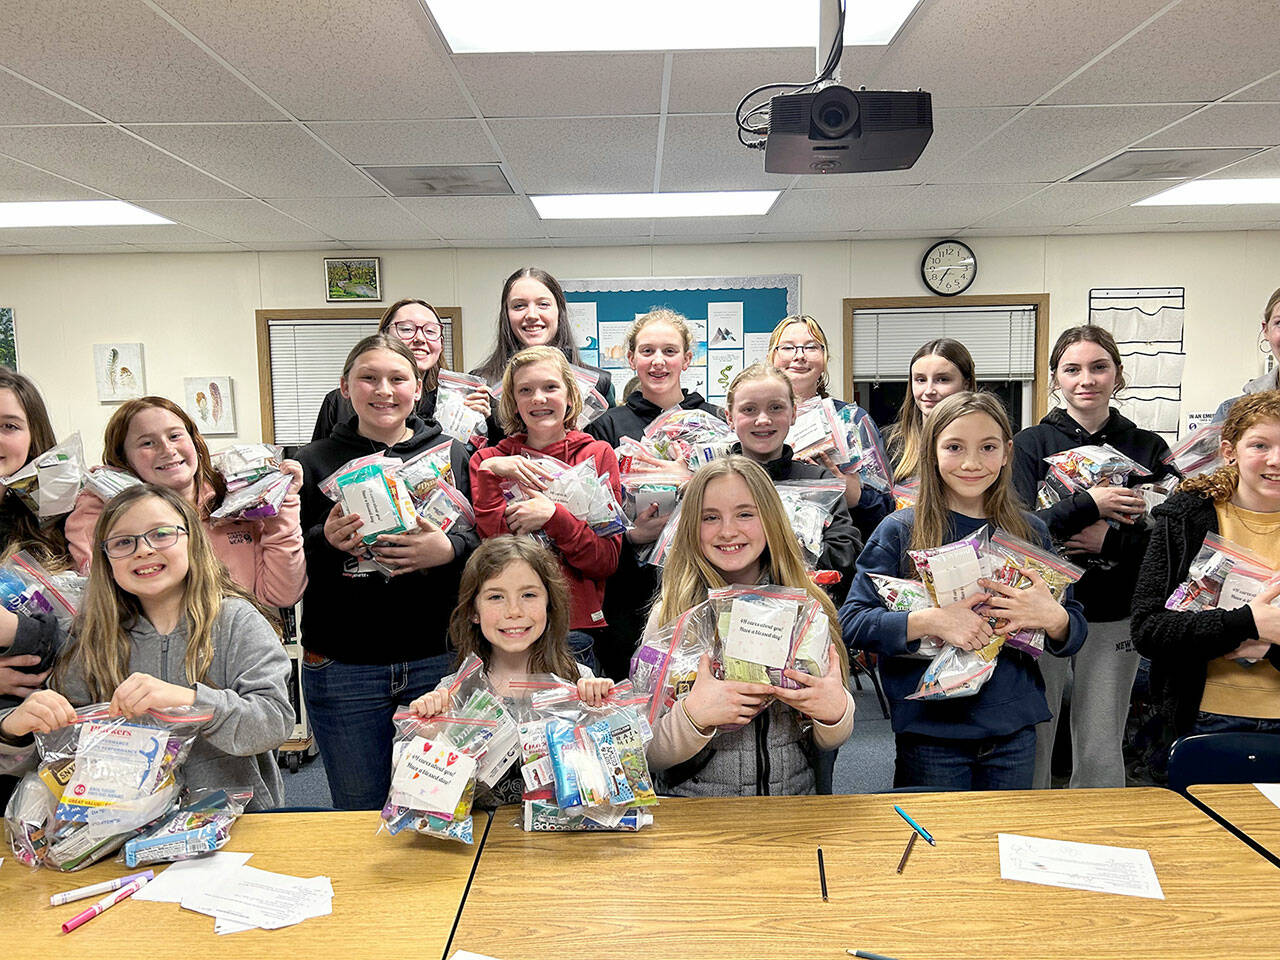 Neon Riders 4-H club members gathered together to make care packages filled with food, soaps, toothbrushes and cheery notes they gave to local charity’s that help those displaced from their homes. (Submitted photo by Lila Torey0)